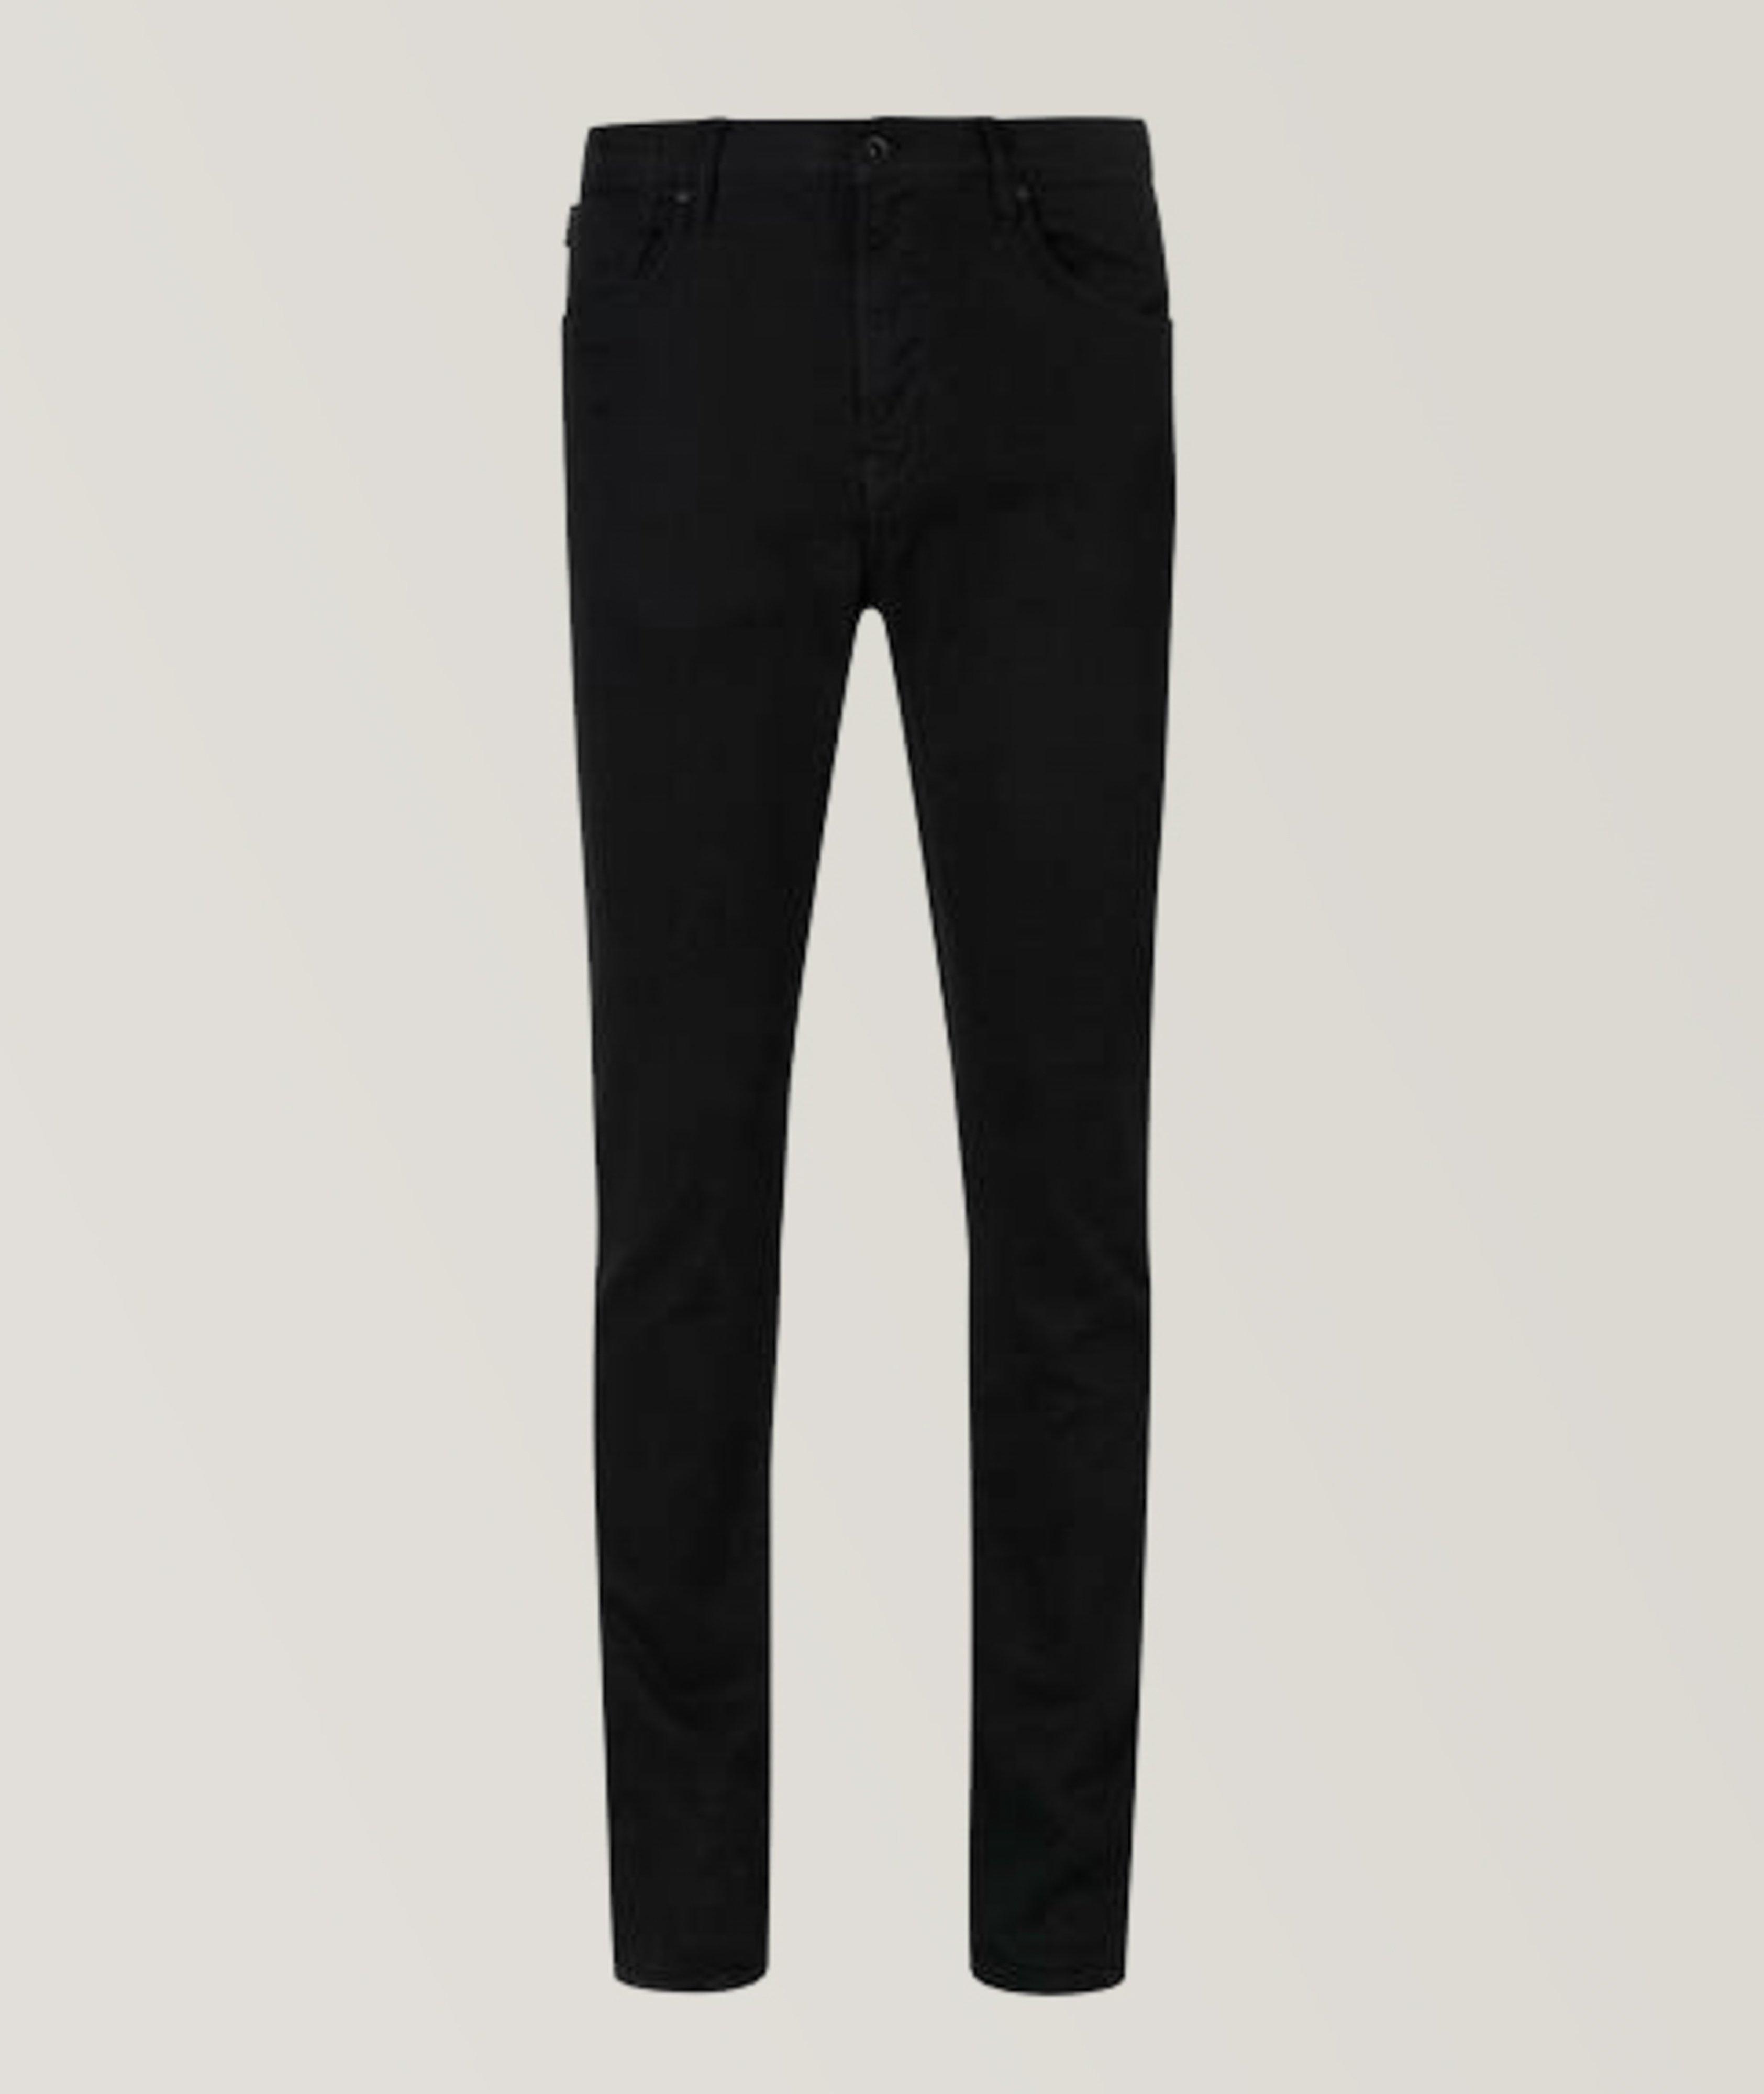 Bowery Cotton-Blend Jeans image 0